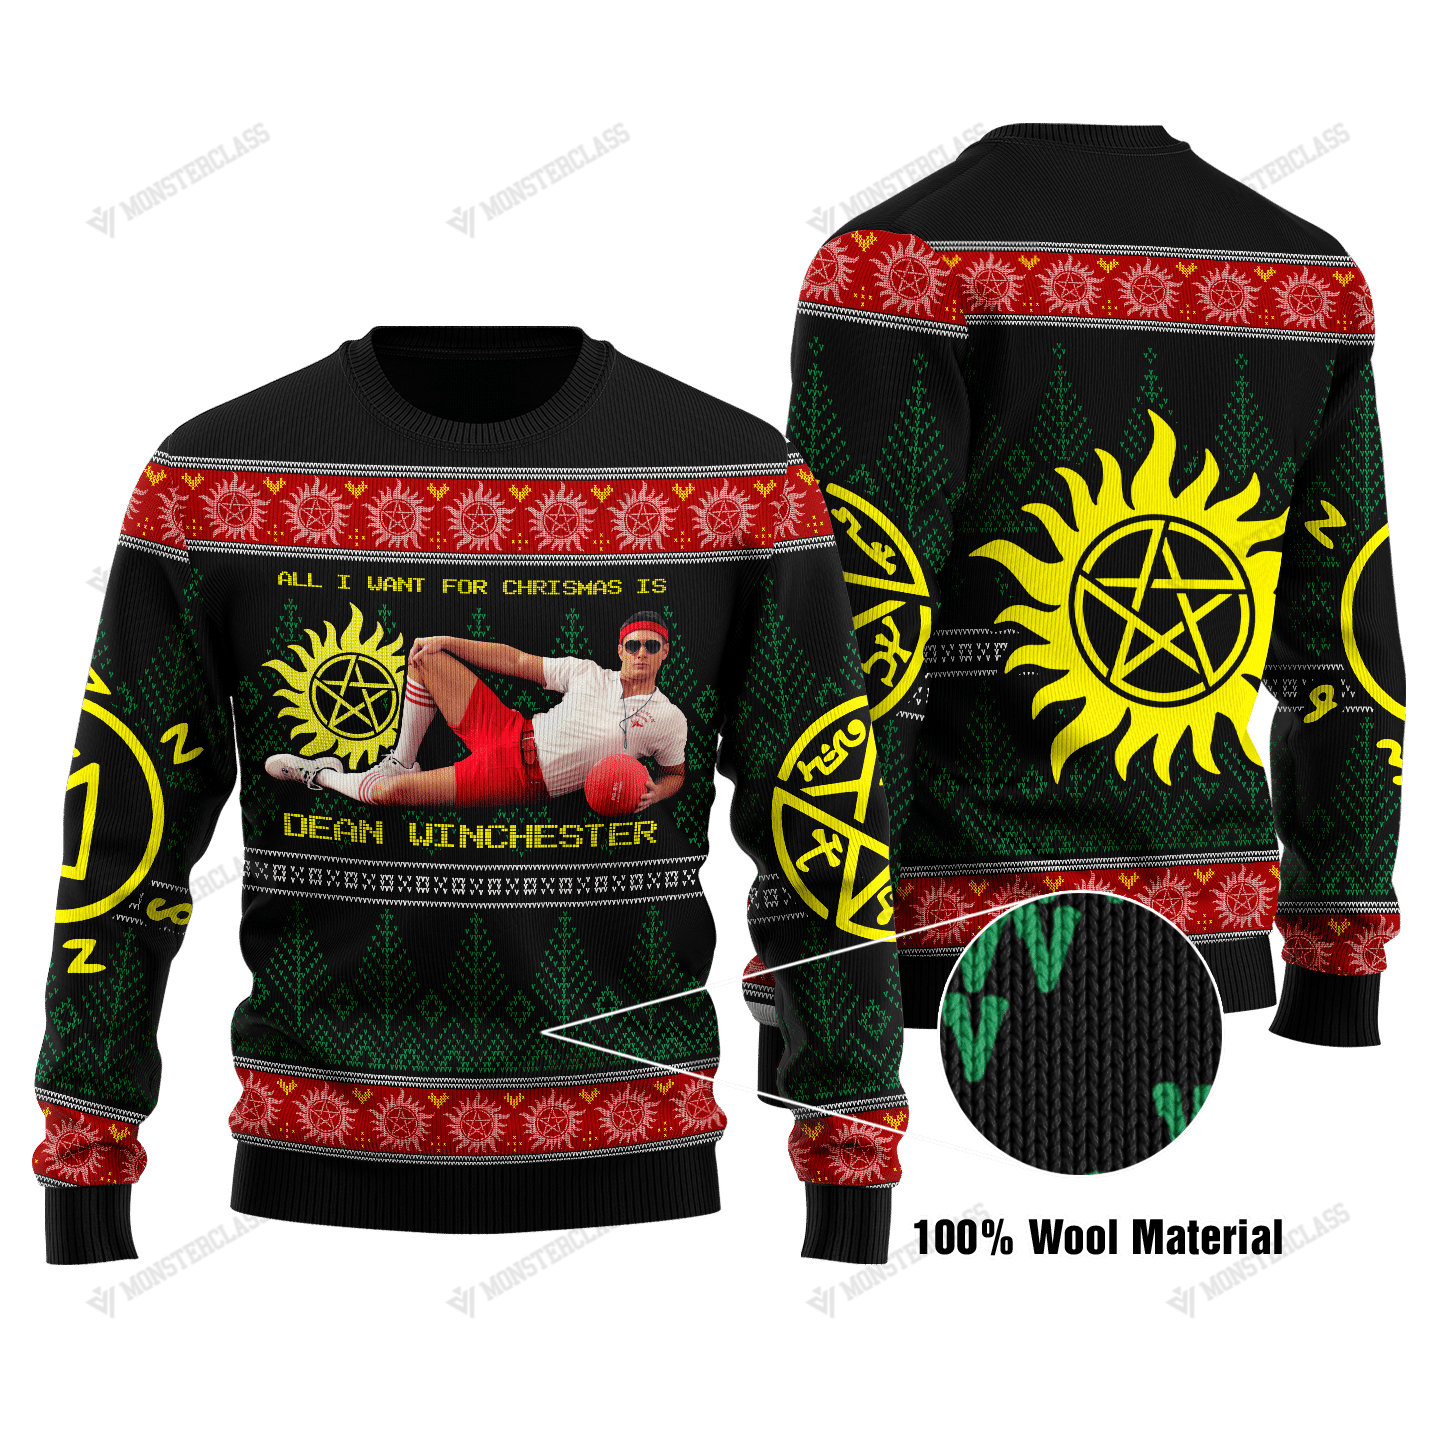 Supernatural All i want for christmas is dean winchester christmas sweater